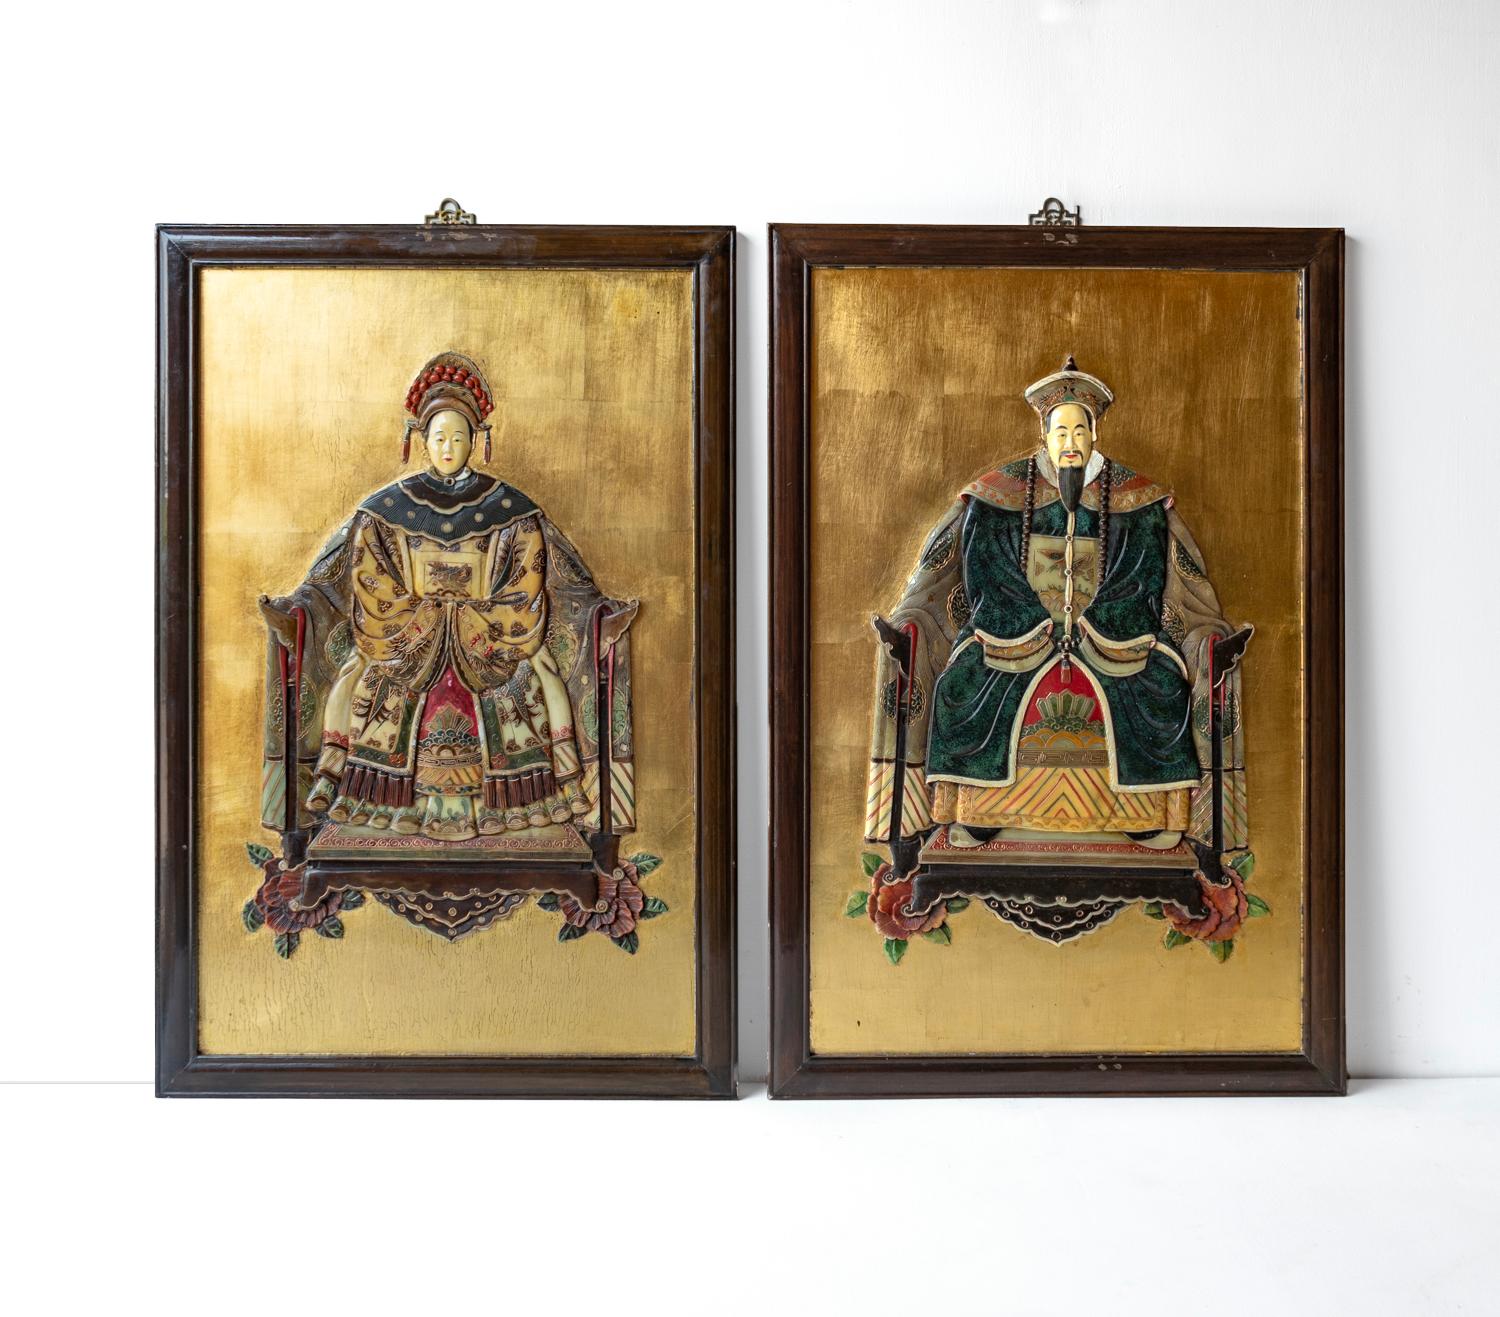 THREE DIMENSIONAL HAND-CARVED SEMI PRECIOUS STONE PICTURES

Depicting a Qing Dynasty Emperor and Empress.

Originating from the Shoushan region of Fujian Province in China.

Carved and inlaid pieces of different semi-precious stones form relief